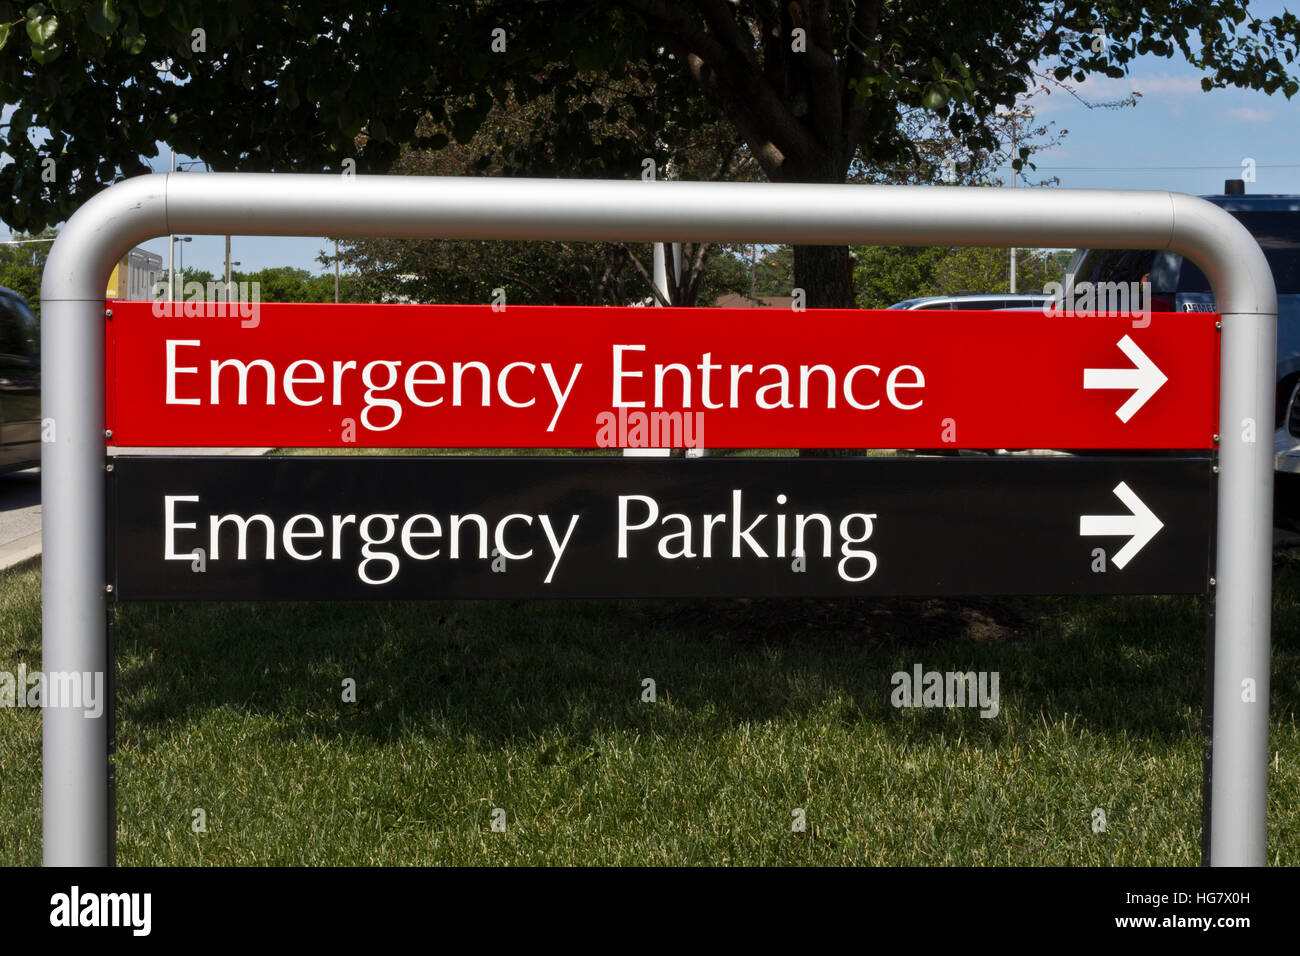 Emergency Entrance and Parking sign for a Local Hospital I Stock Photo